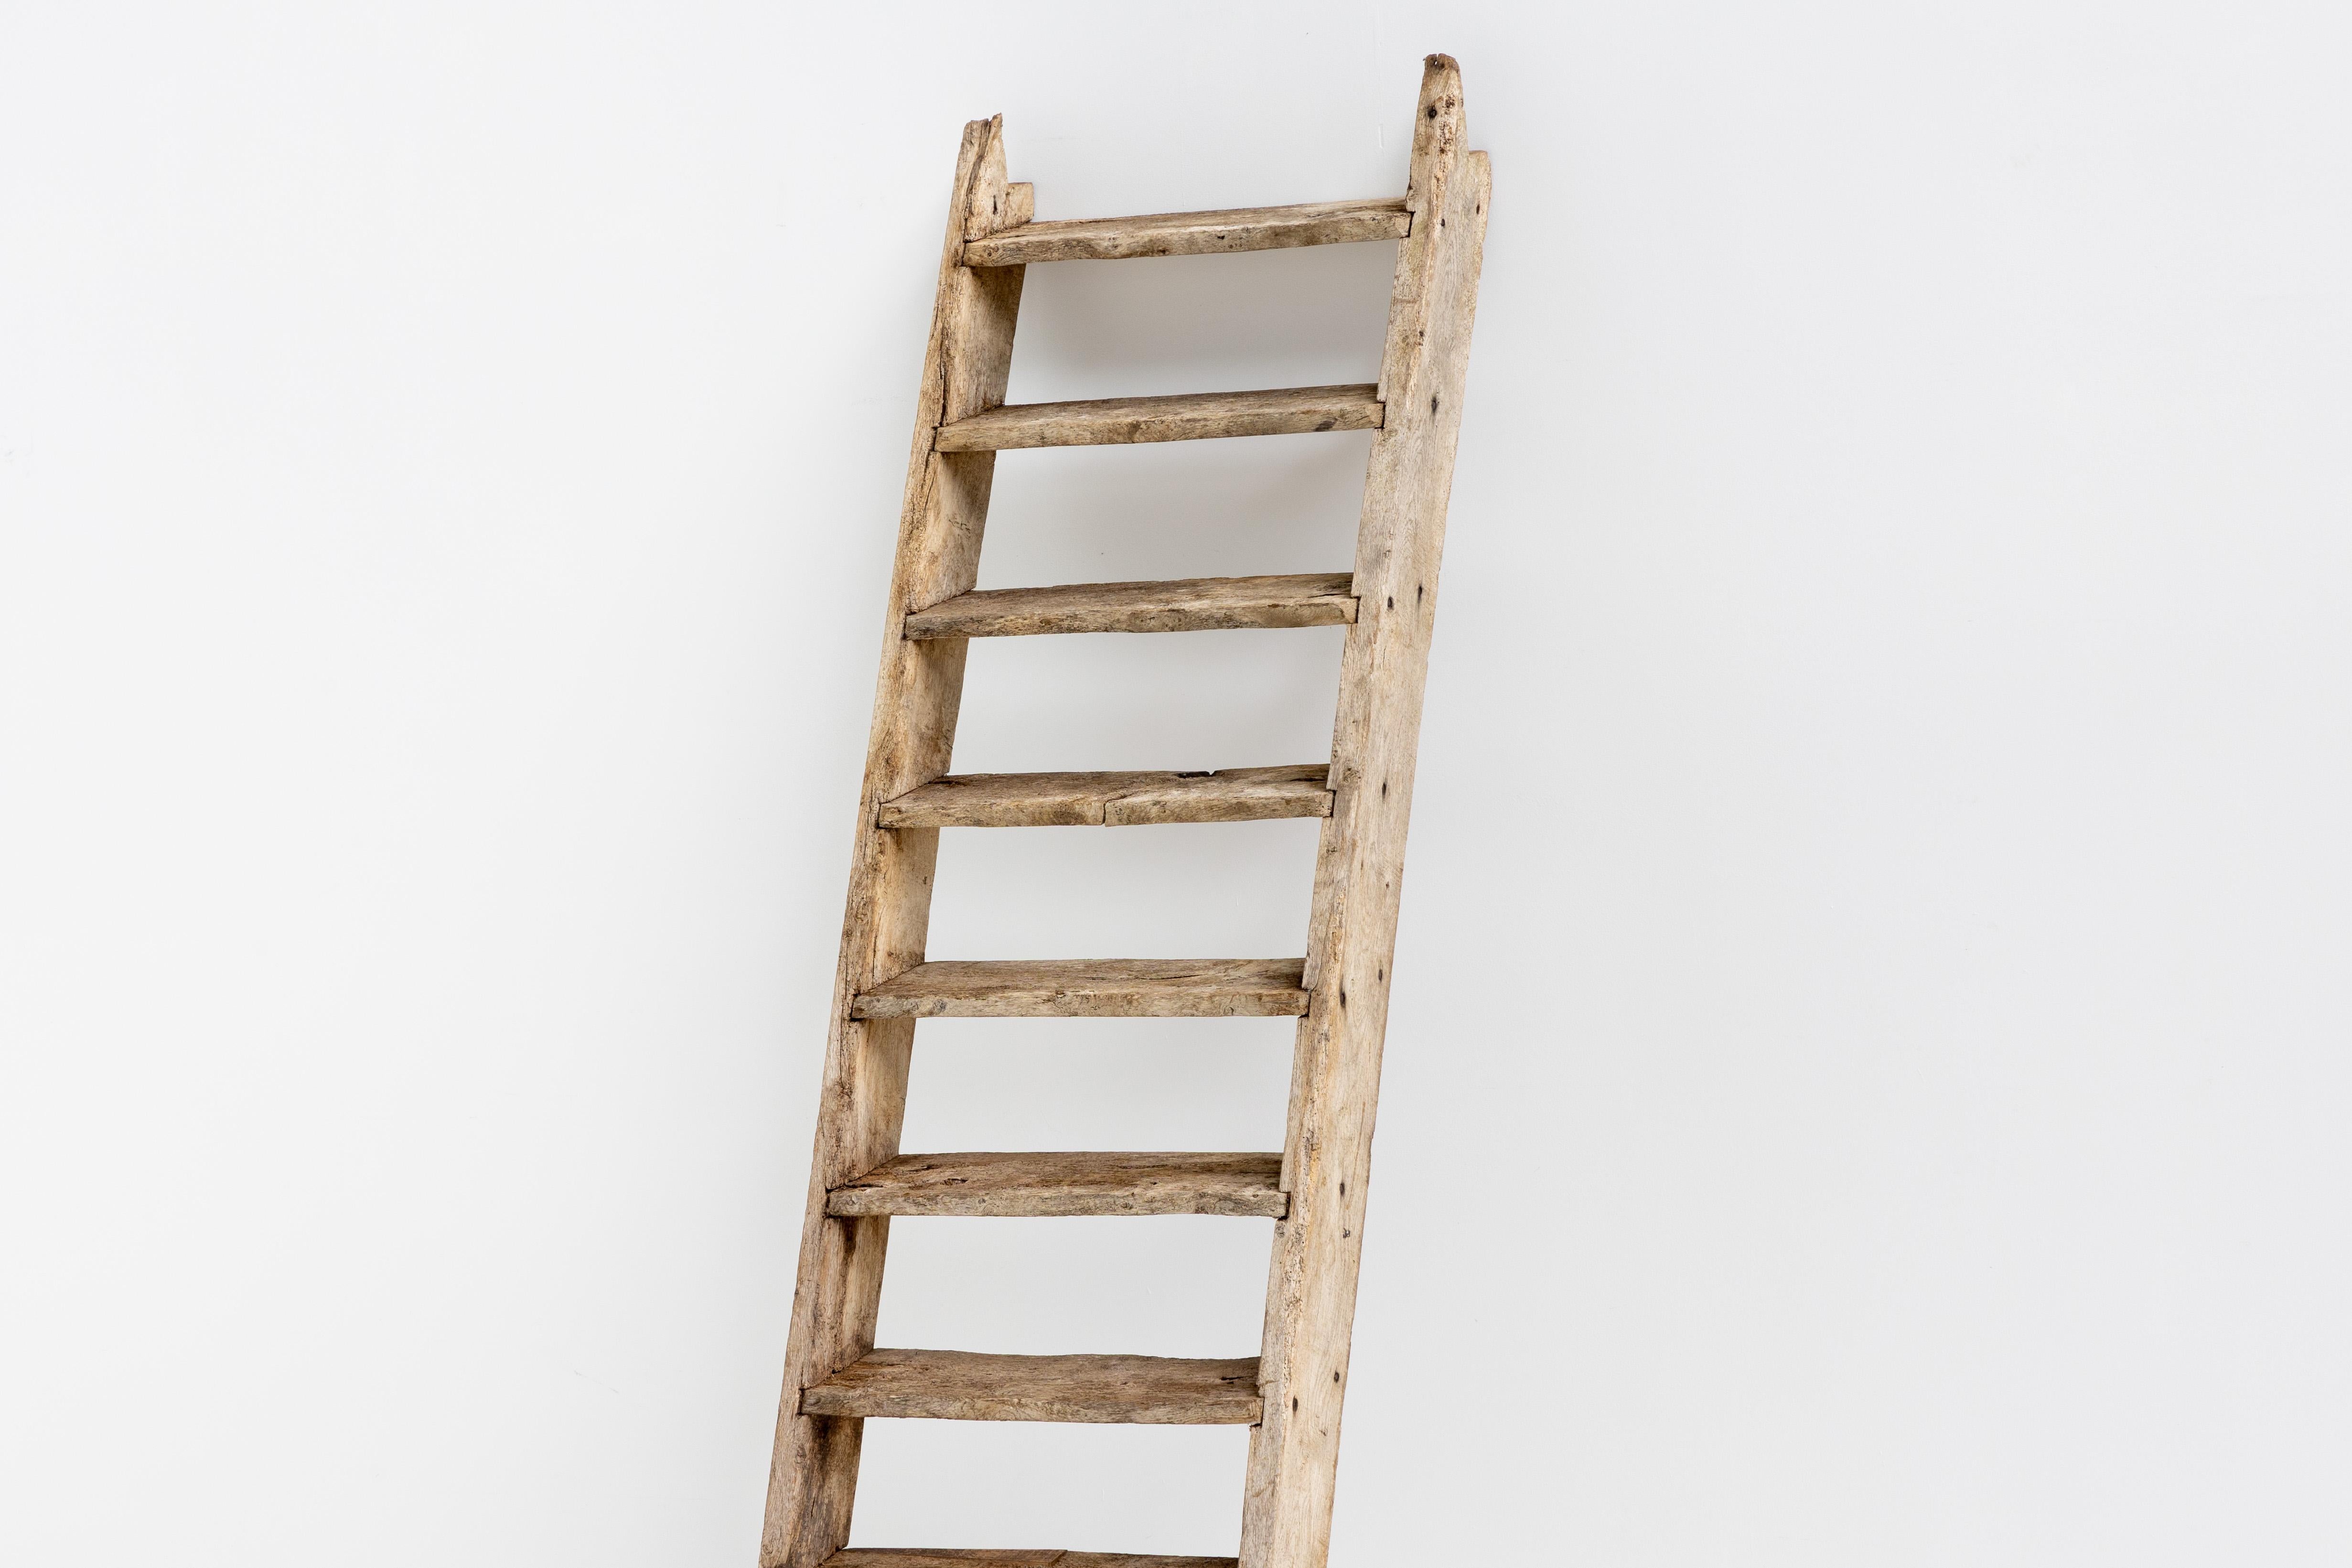 Rustic; Art Populaire; France; Early 20th Century; Monoxylite; Wabi Sabi; Travail Populaire; Folk Art;

Rustic French ladder adorned with a fascinating patina. This unique piece embodies the essence of French craftsmanship, evoking a bygone era of